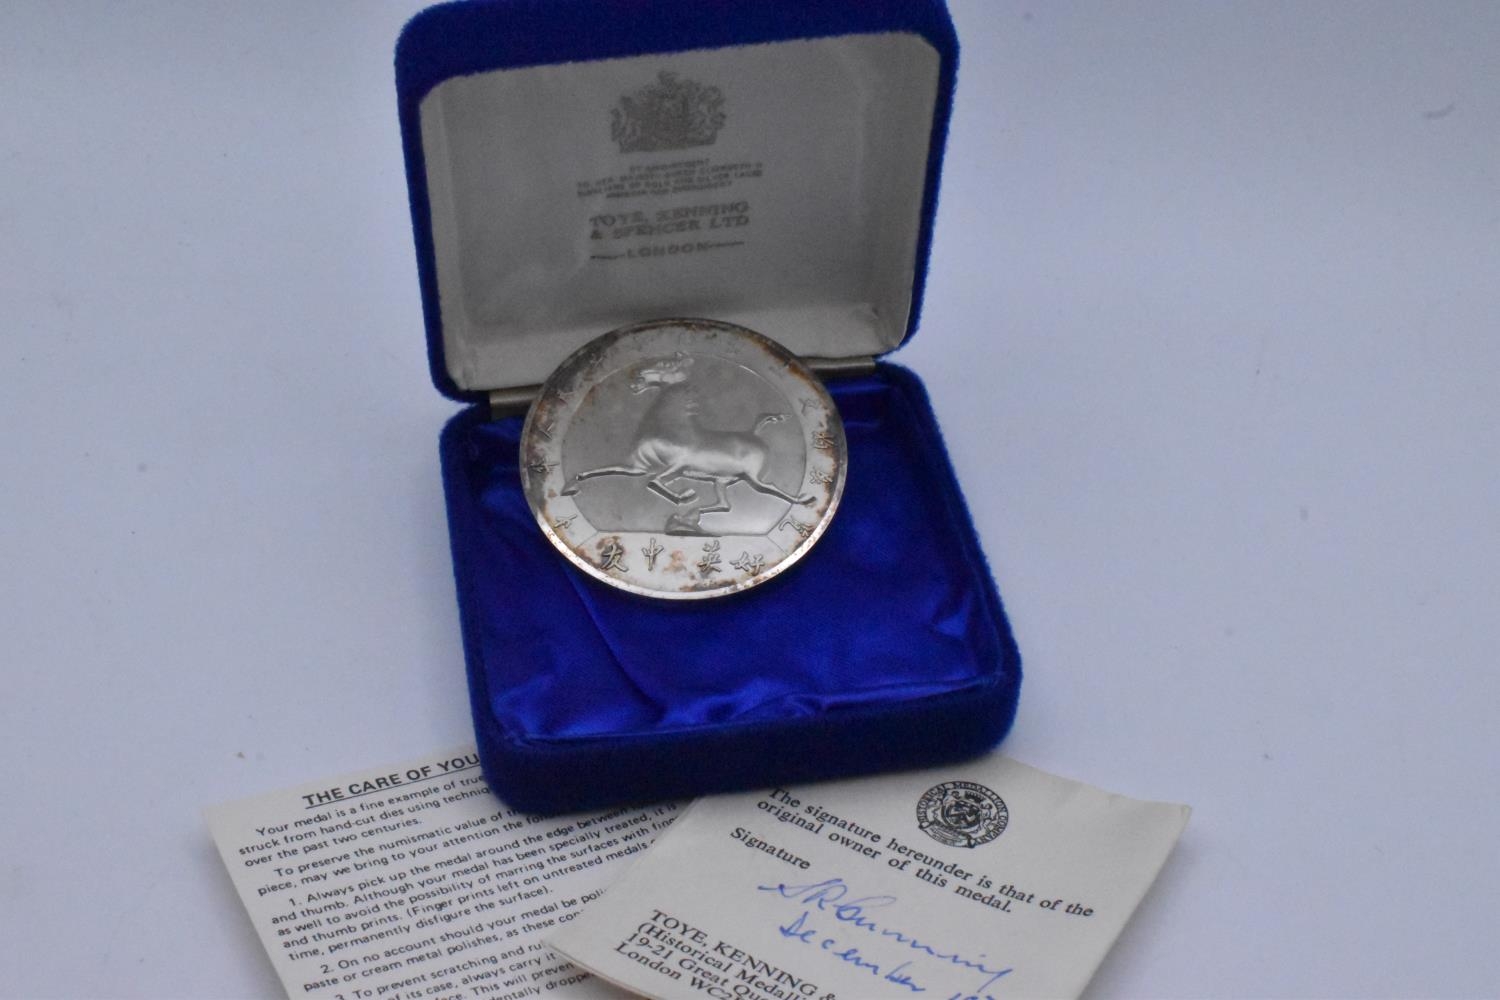 Silver Medal - "The Chinese Exhibition, Royal Academy, London 1973-1974", by Toye, Kenning & - Image 3 of 4